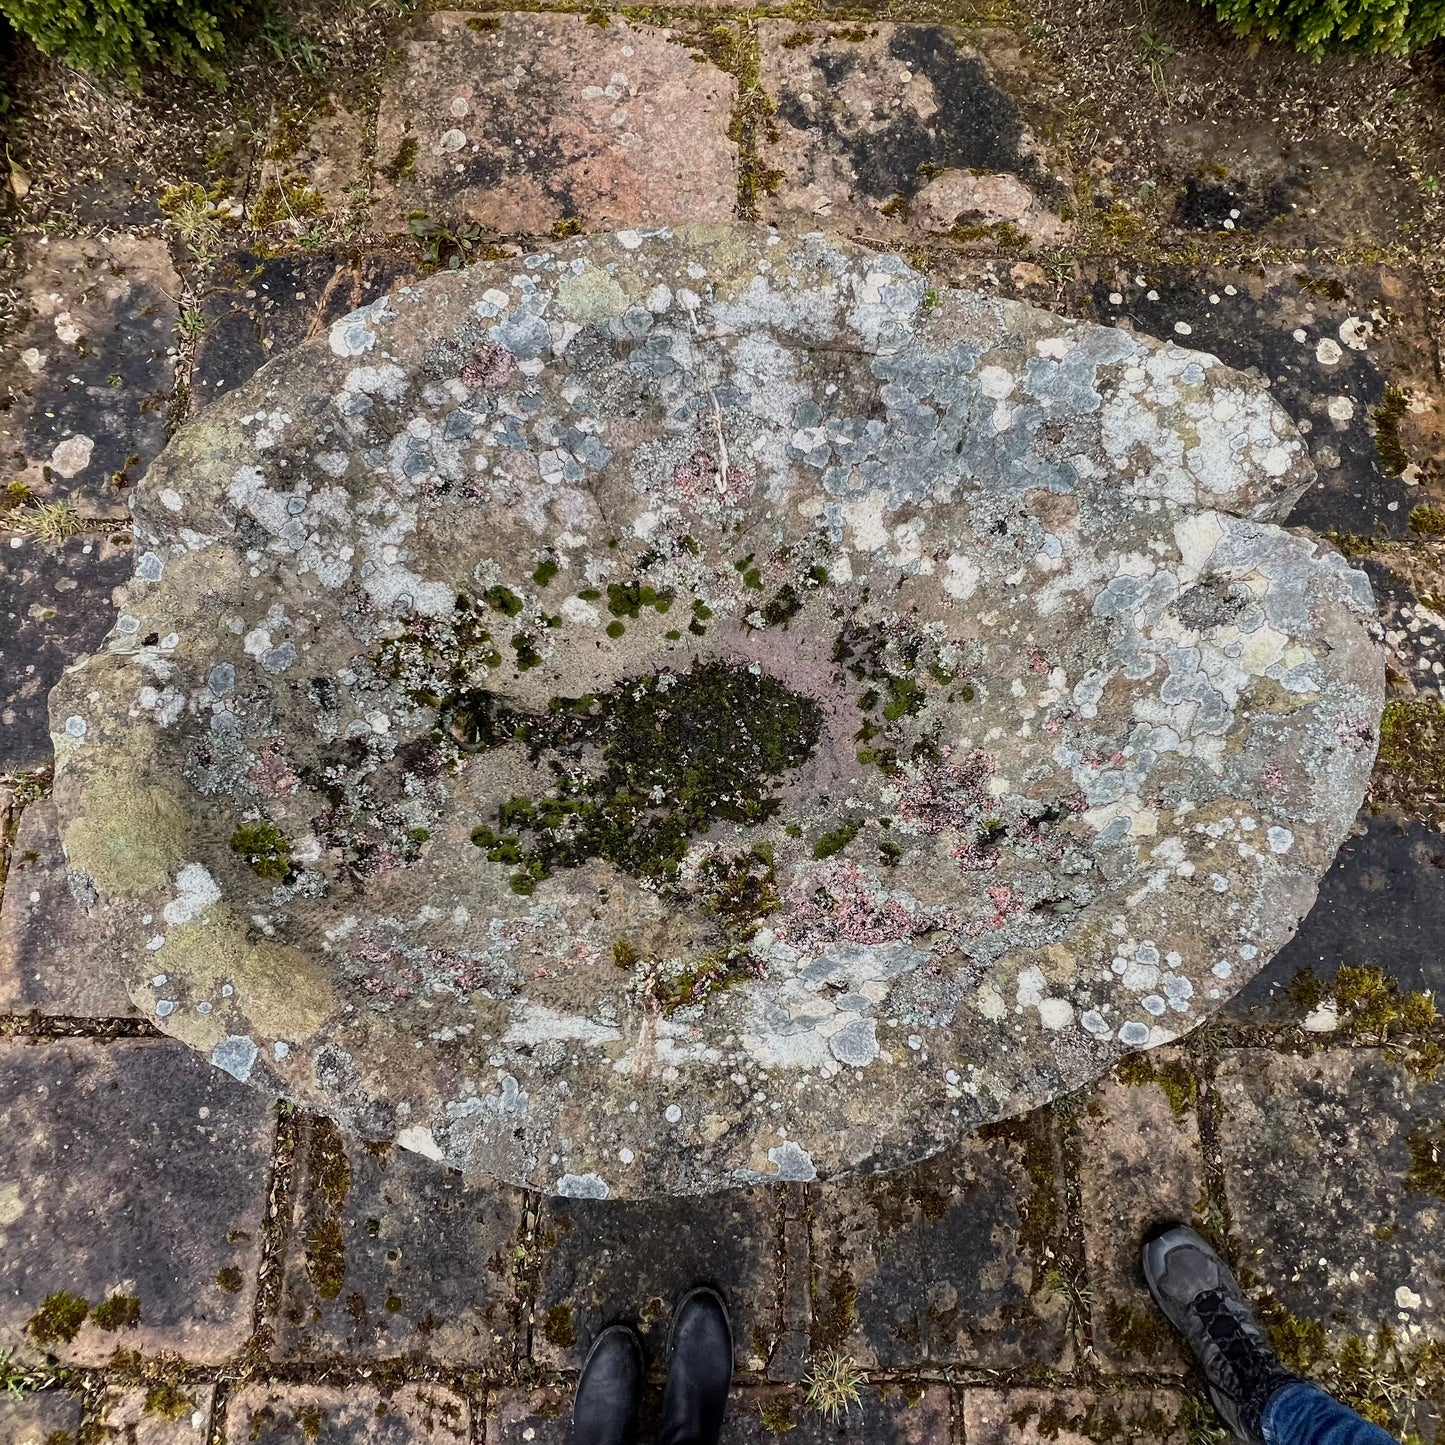 Monumental Roman Basin or Lavabo from Furness Abbey